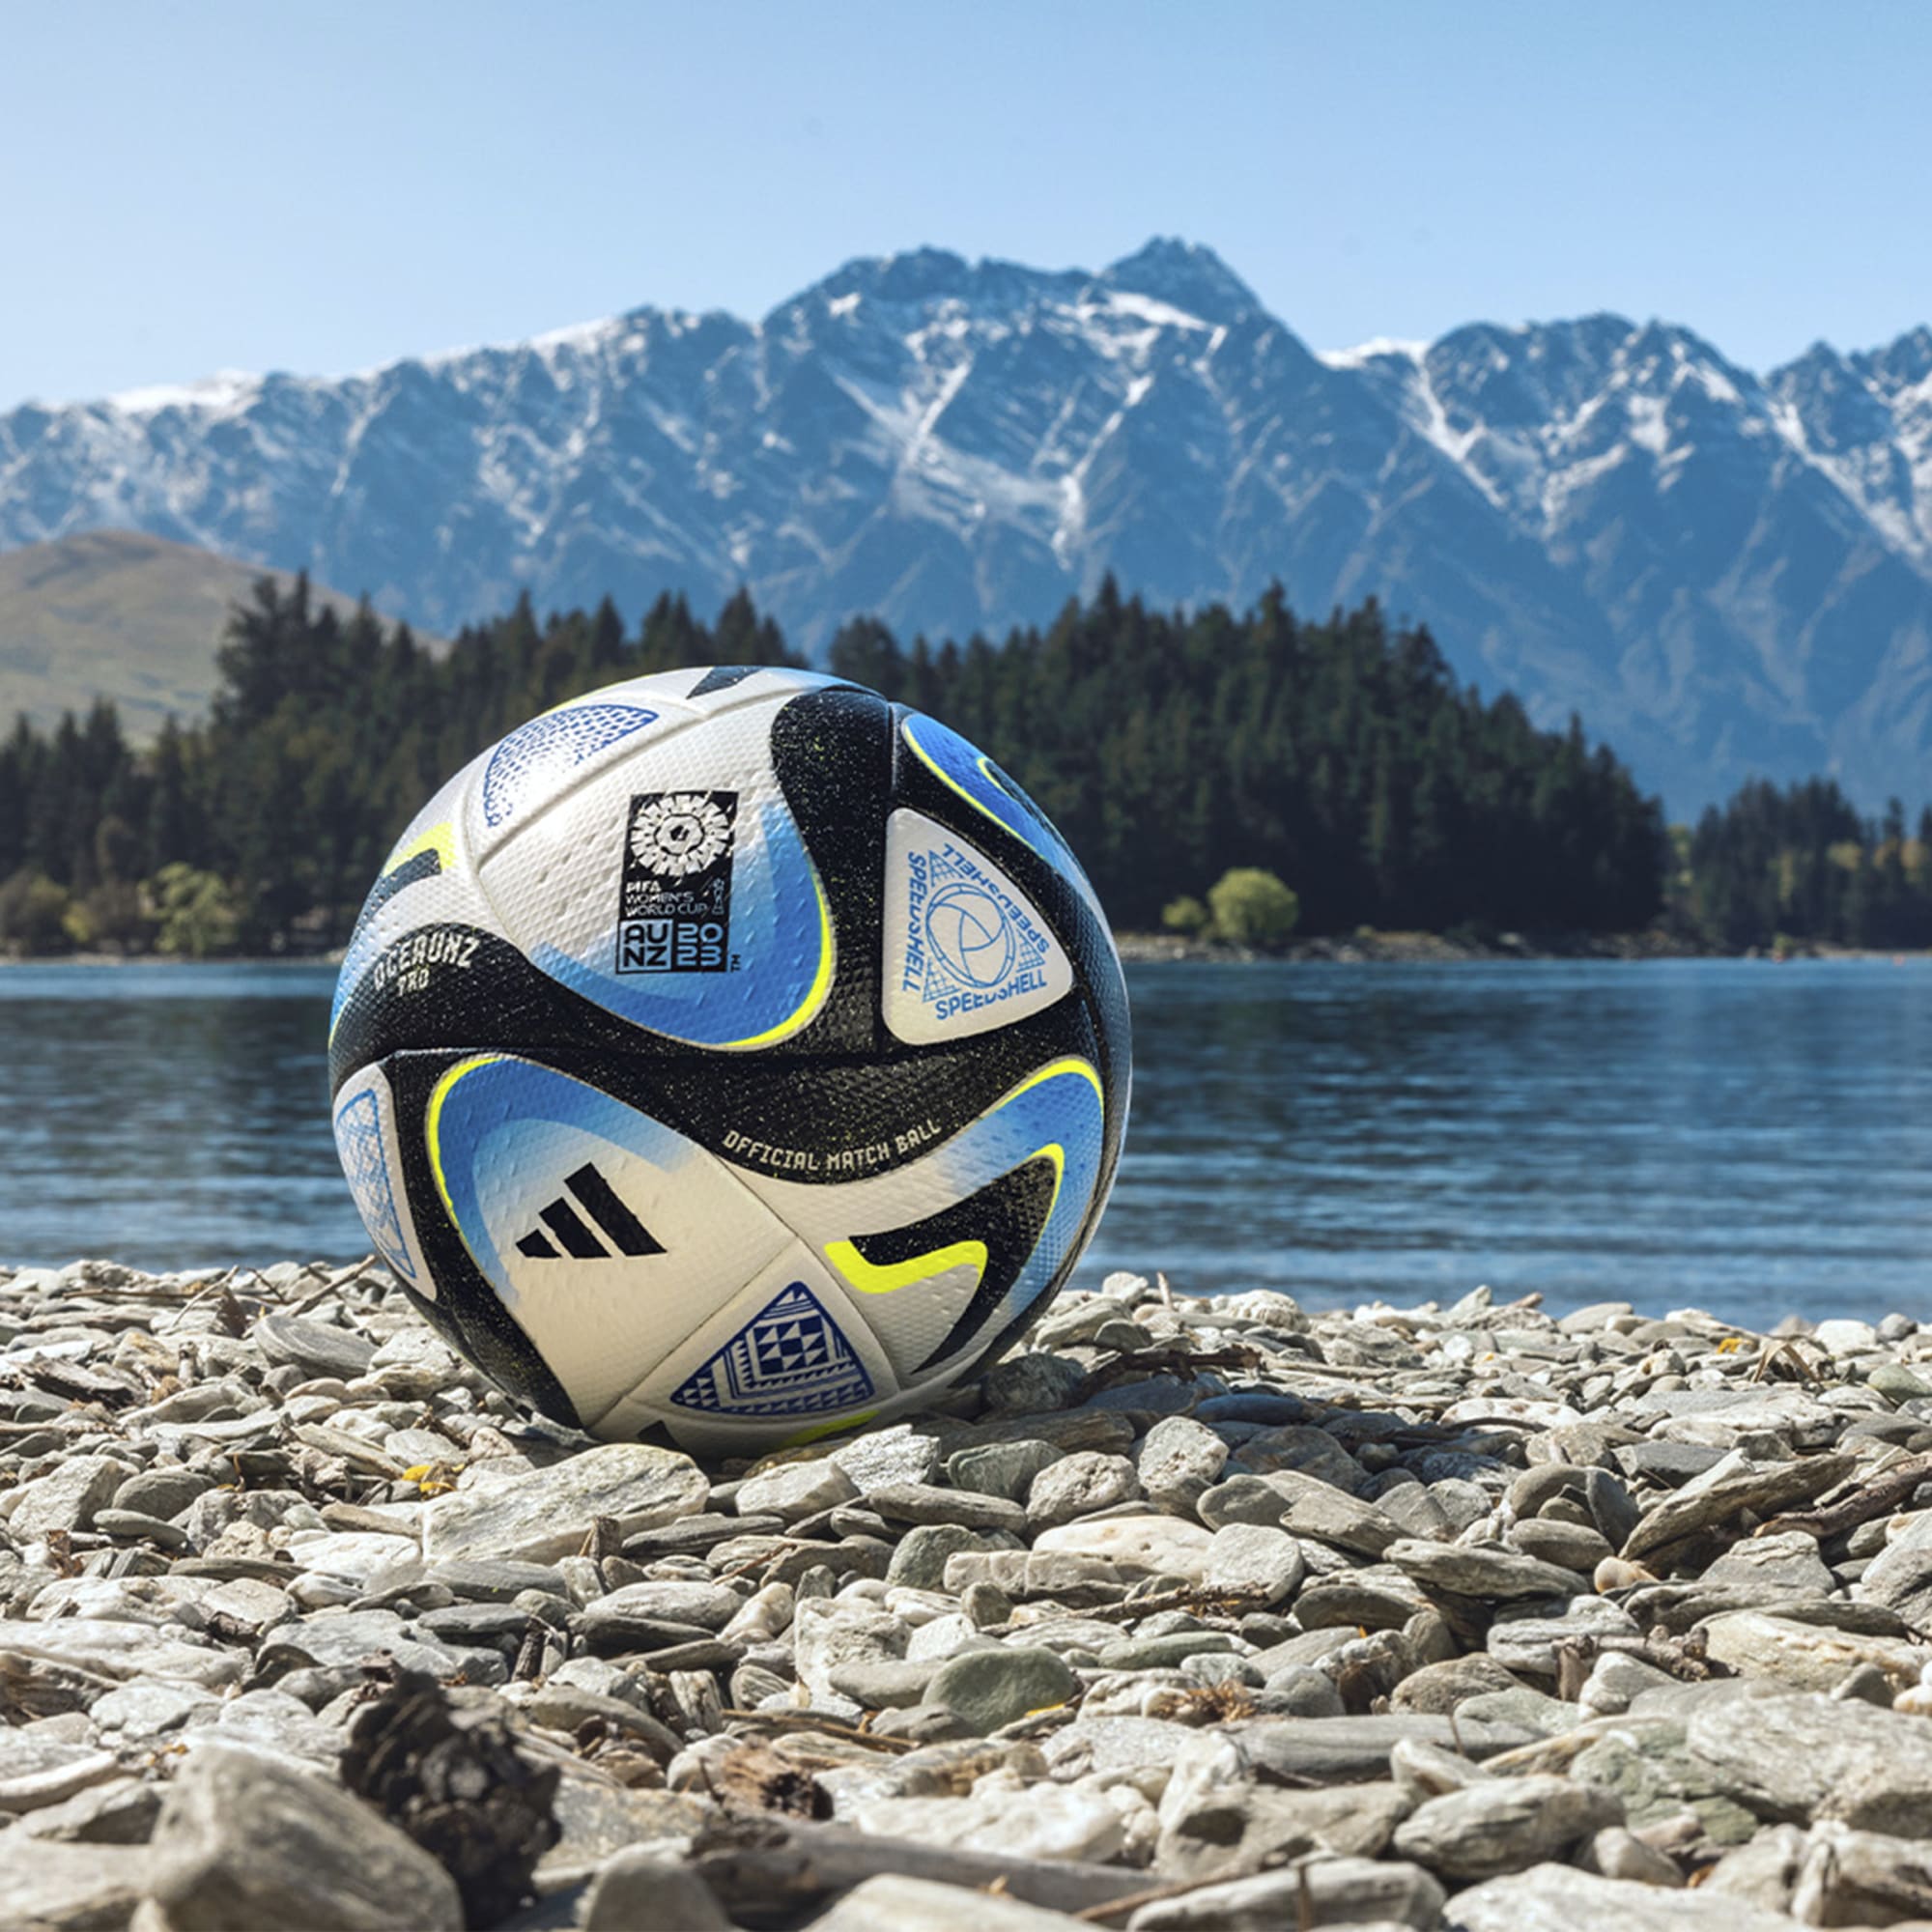 Adidas unveils Brazuca, the official match ball for World Cup - Portland  Business Journal